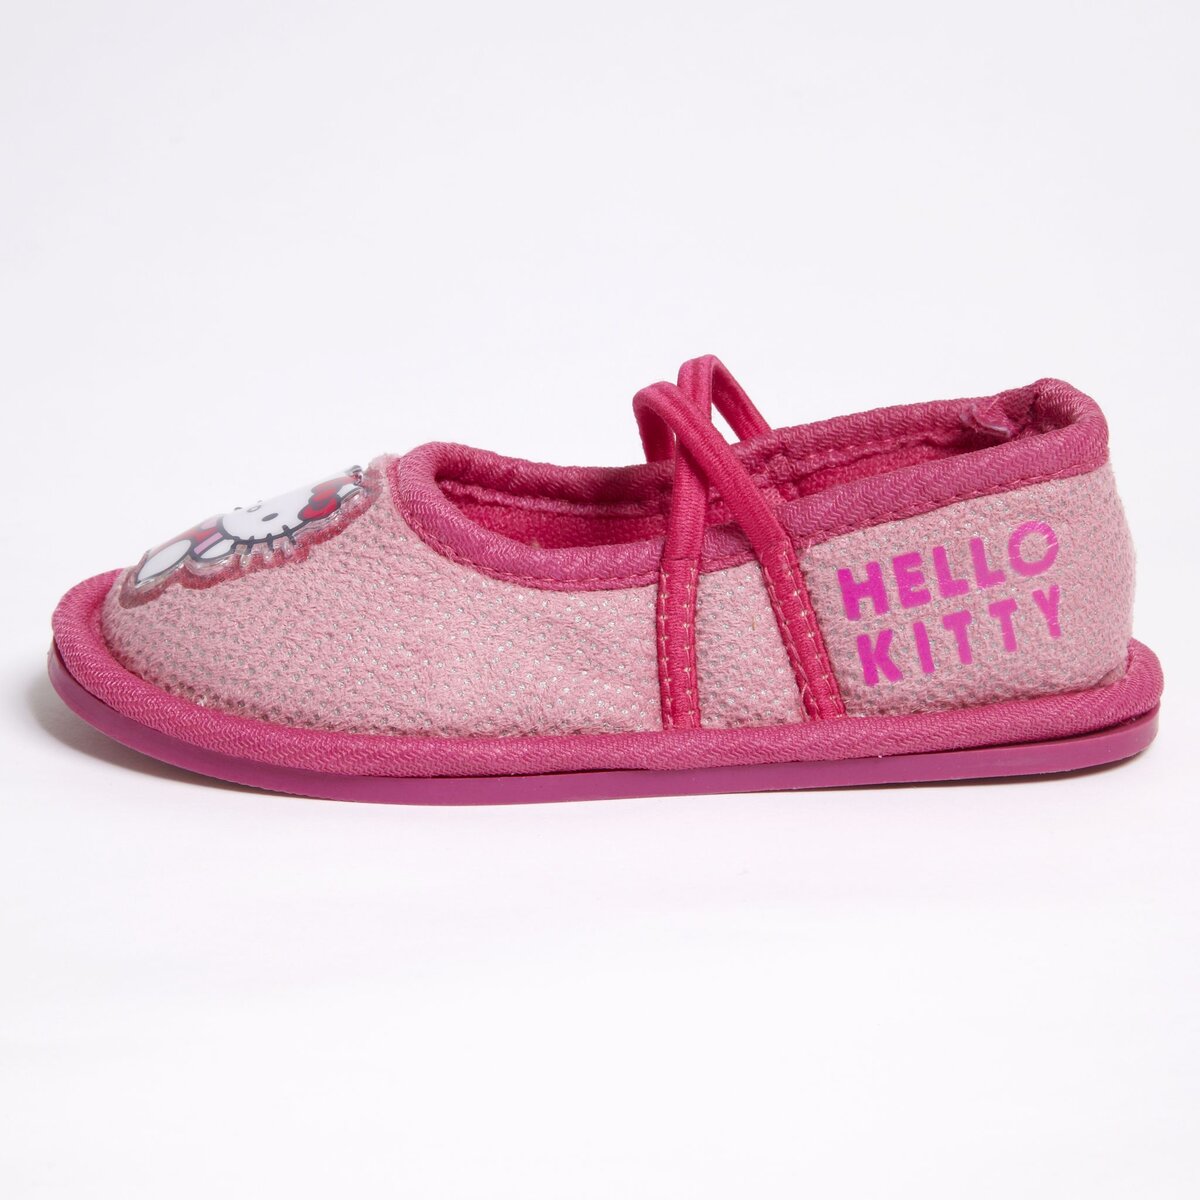 HELLO KITTY chaussons fille du 24 au 30